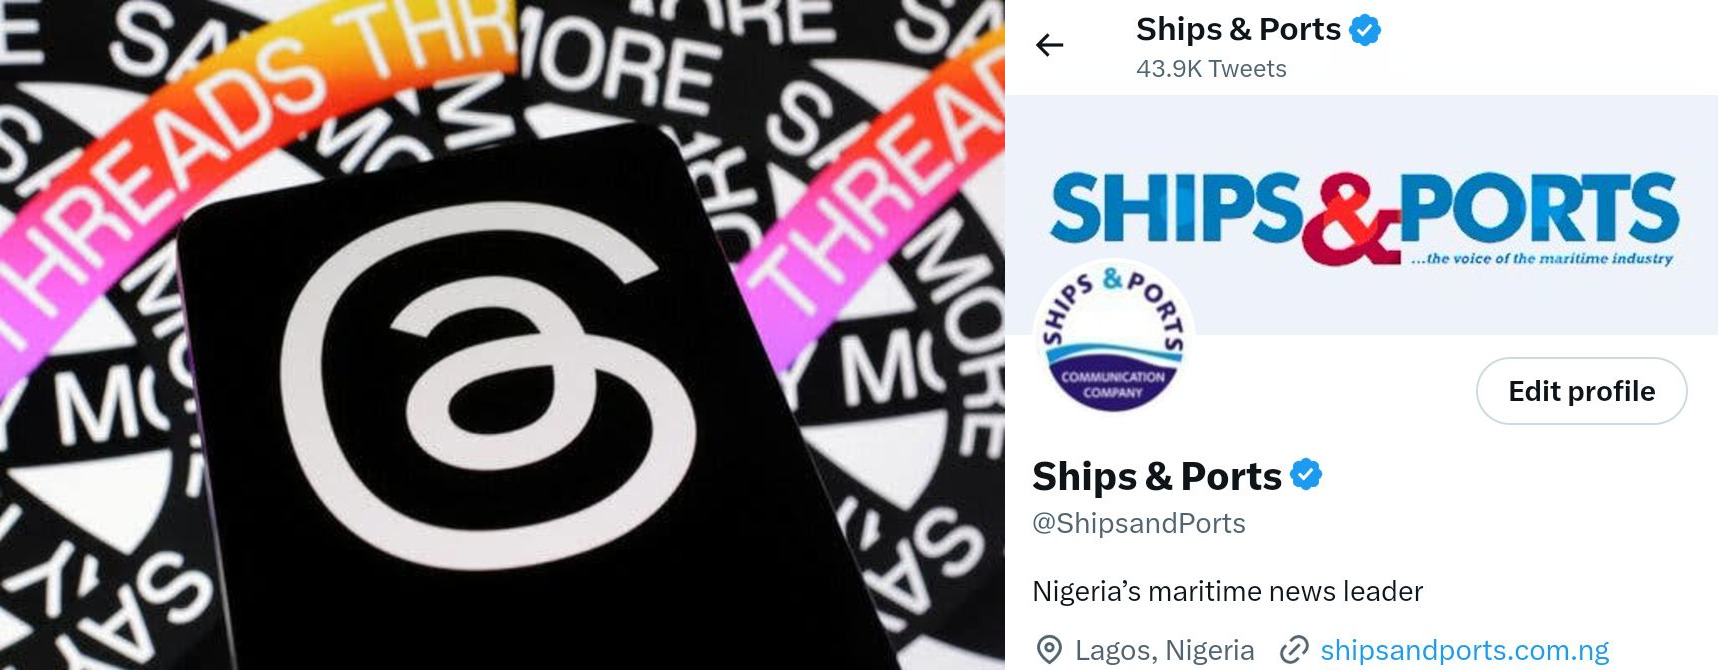 Ships & Ports joins Threads, gets Twitter blue badge 